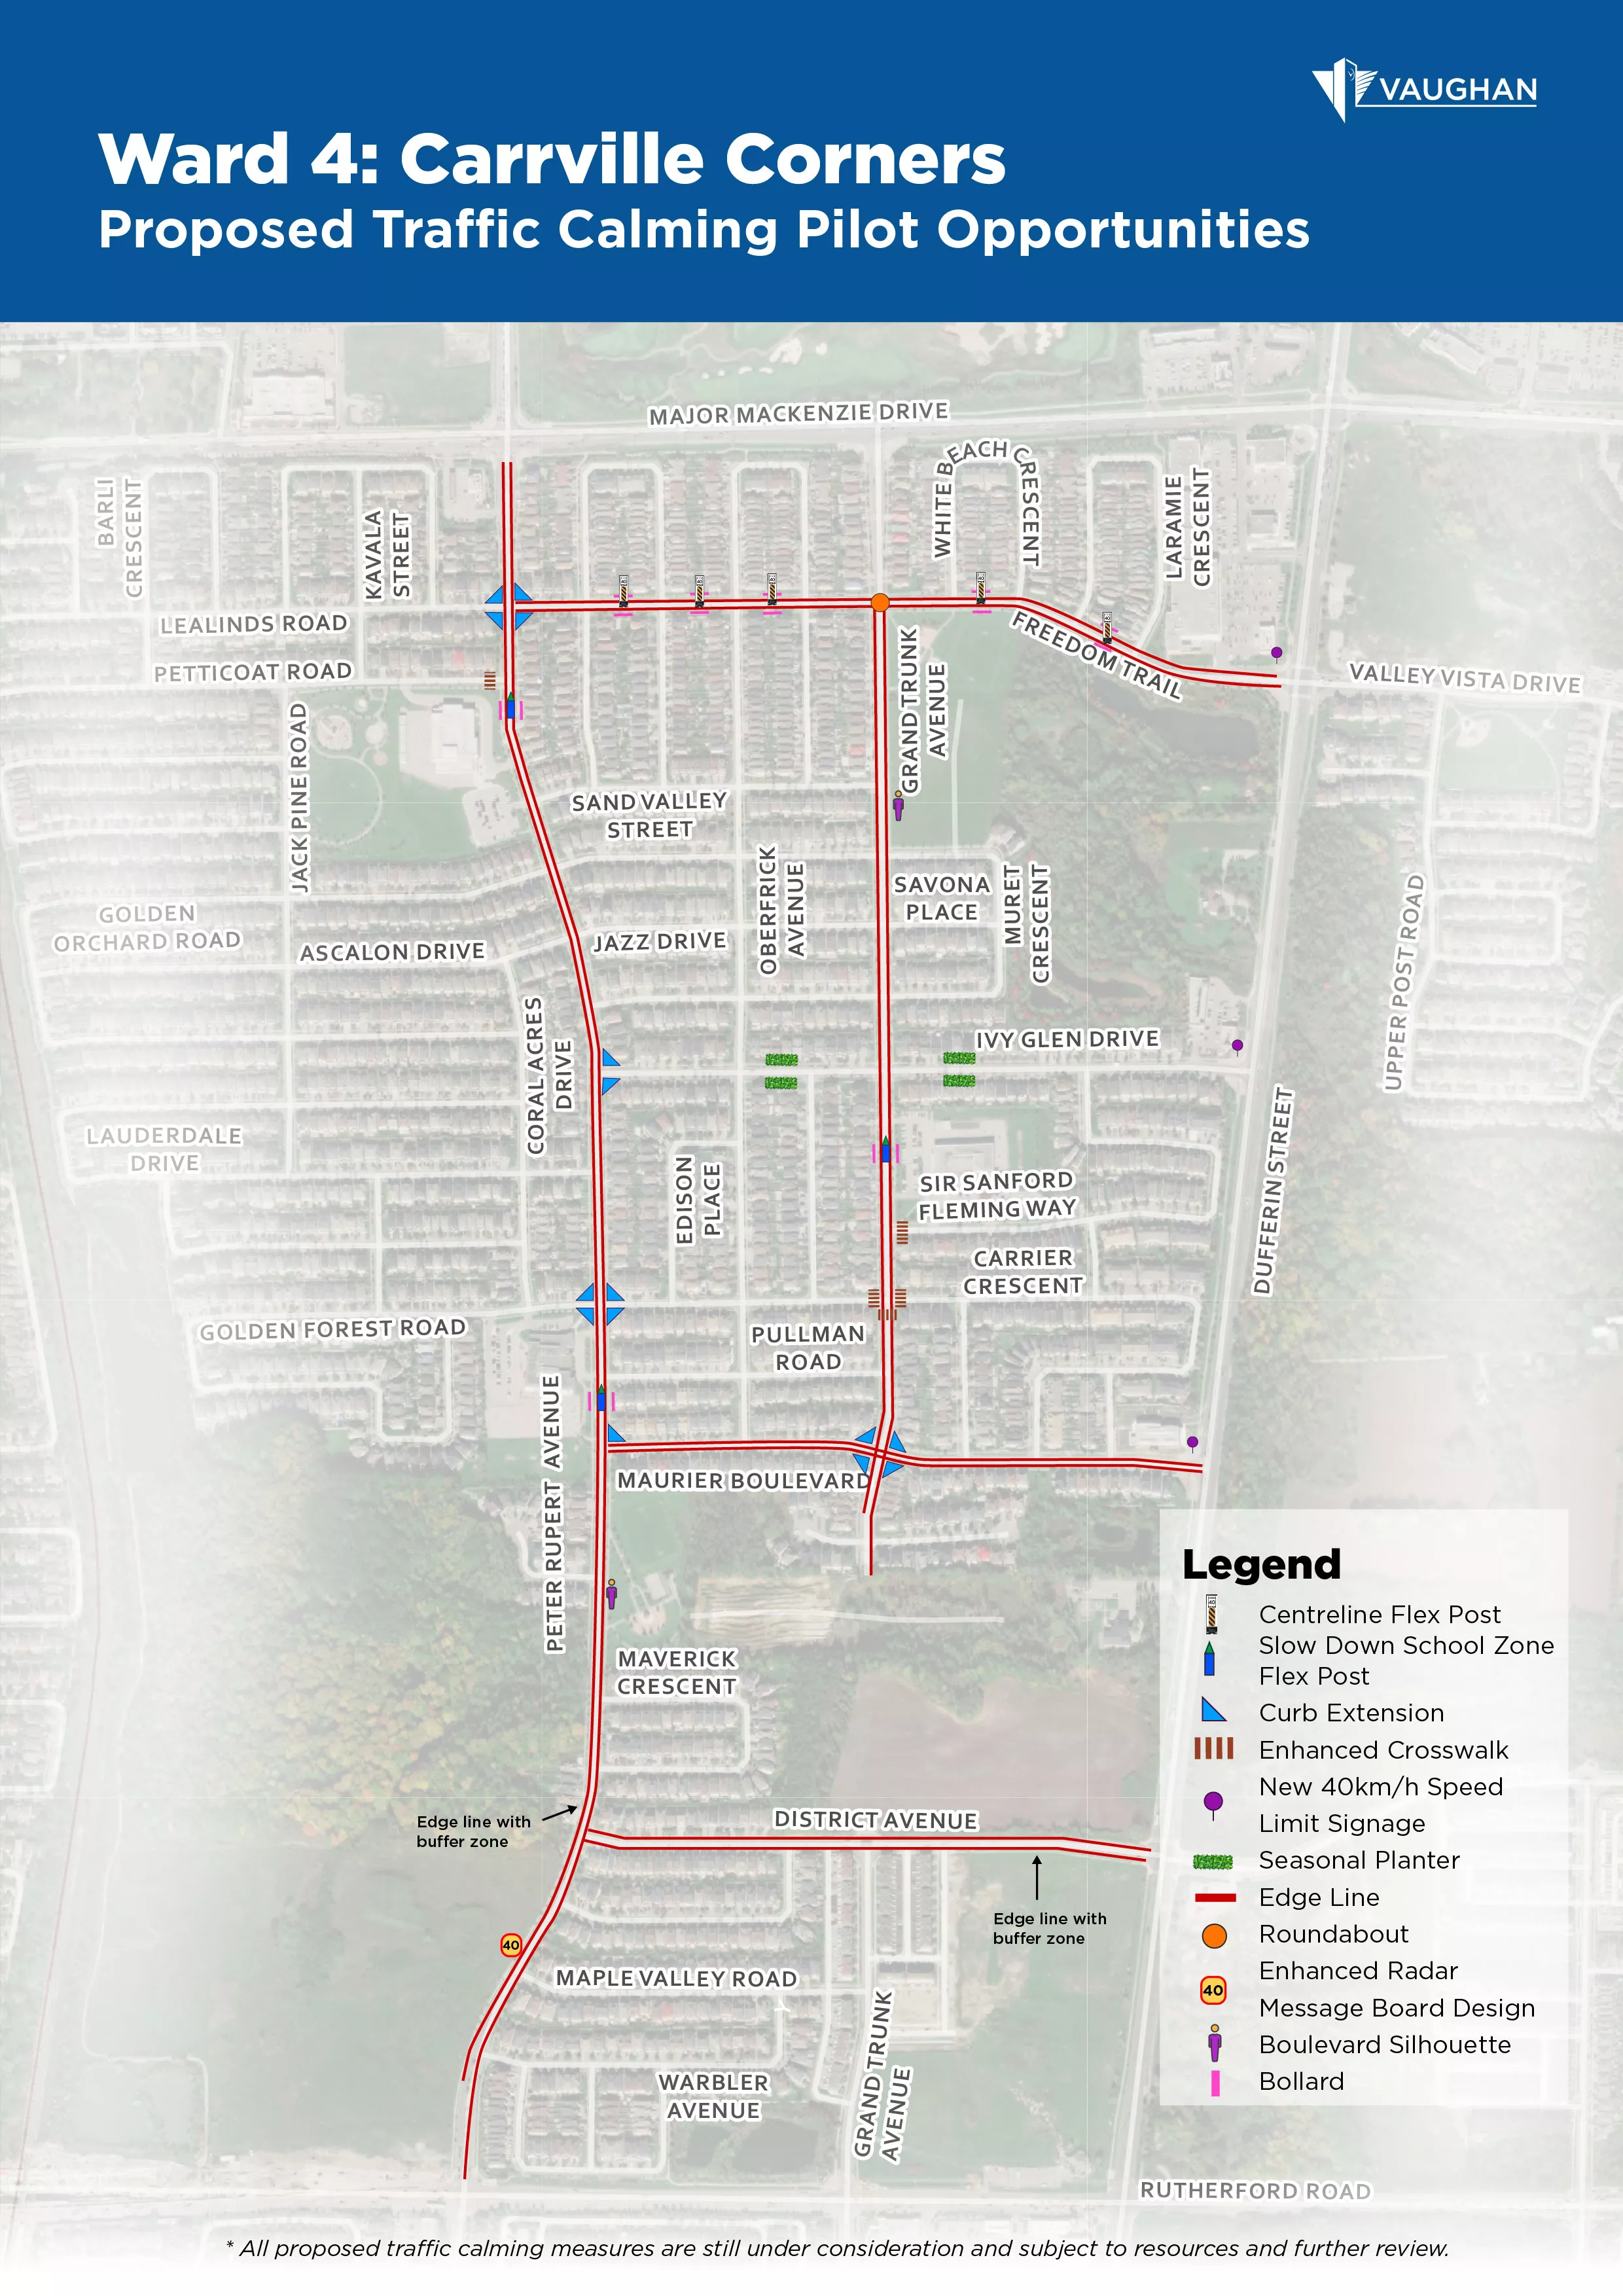 Map of Carrville Corners with traffic calming measures